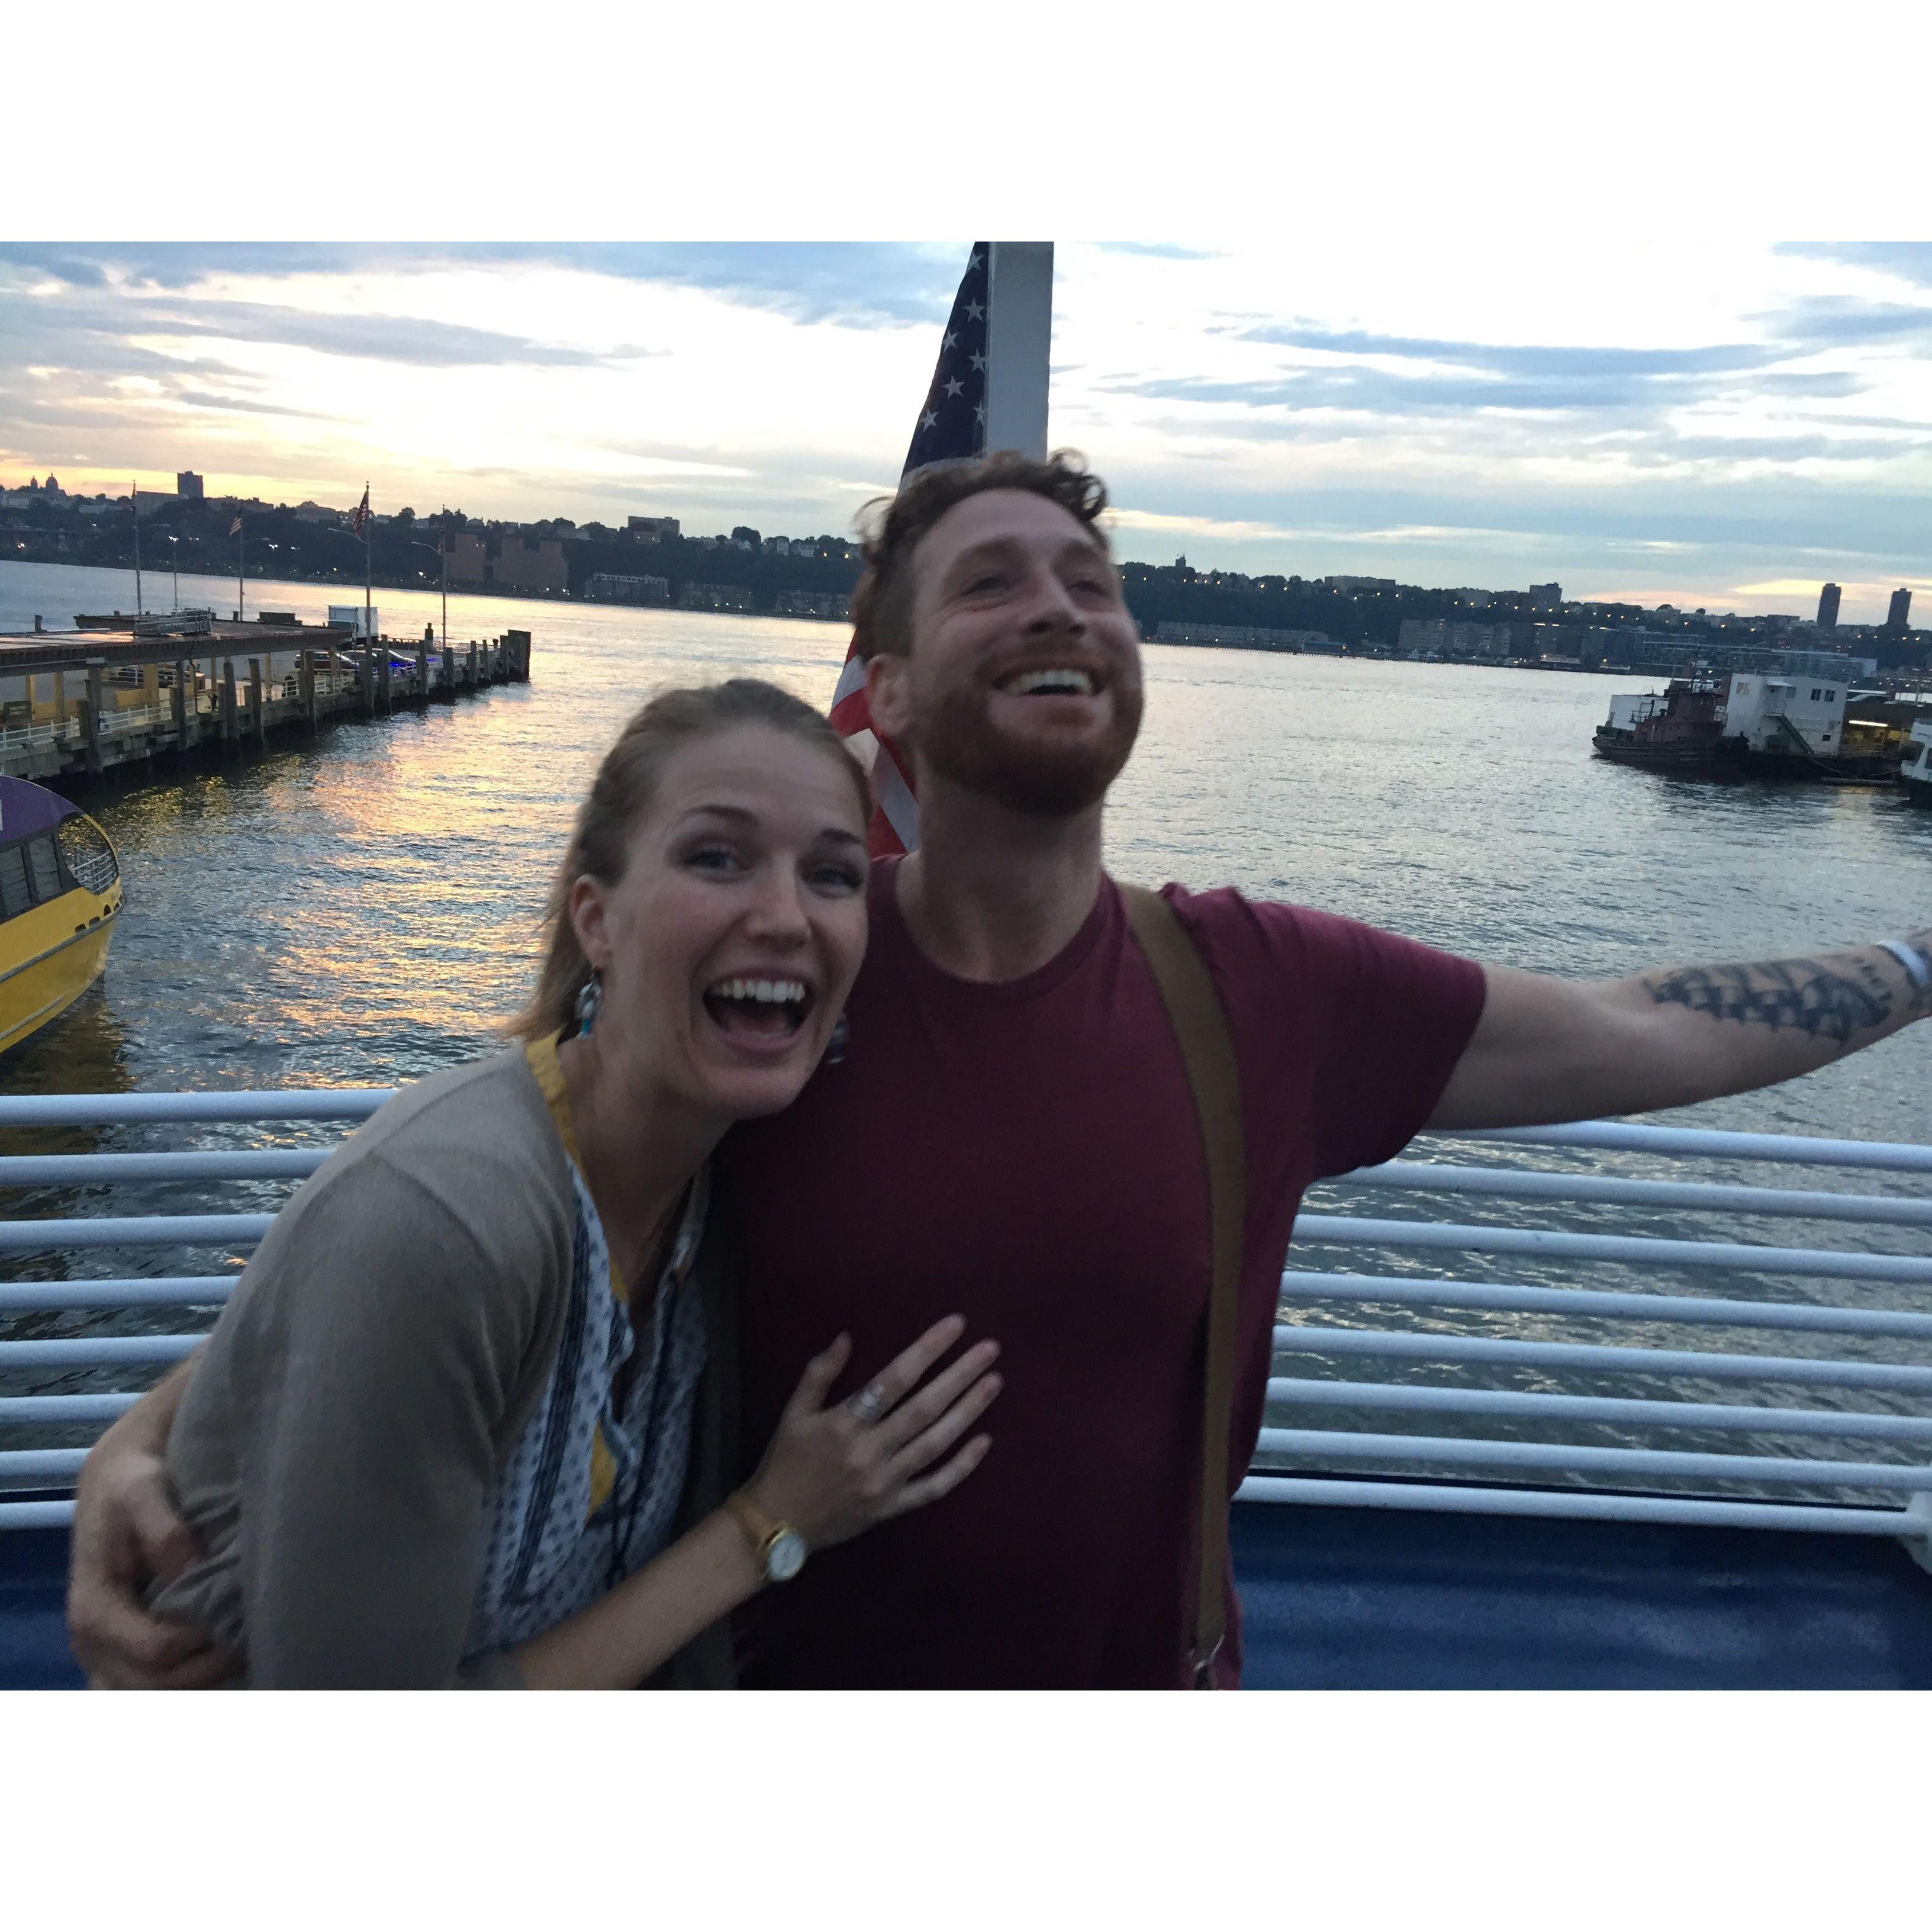 2 years together on the Lobster Boat, 2018